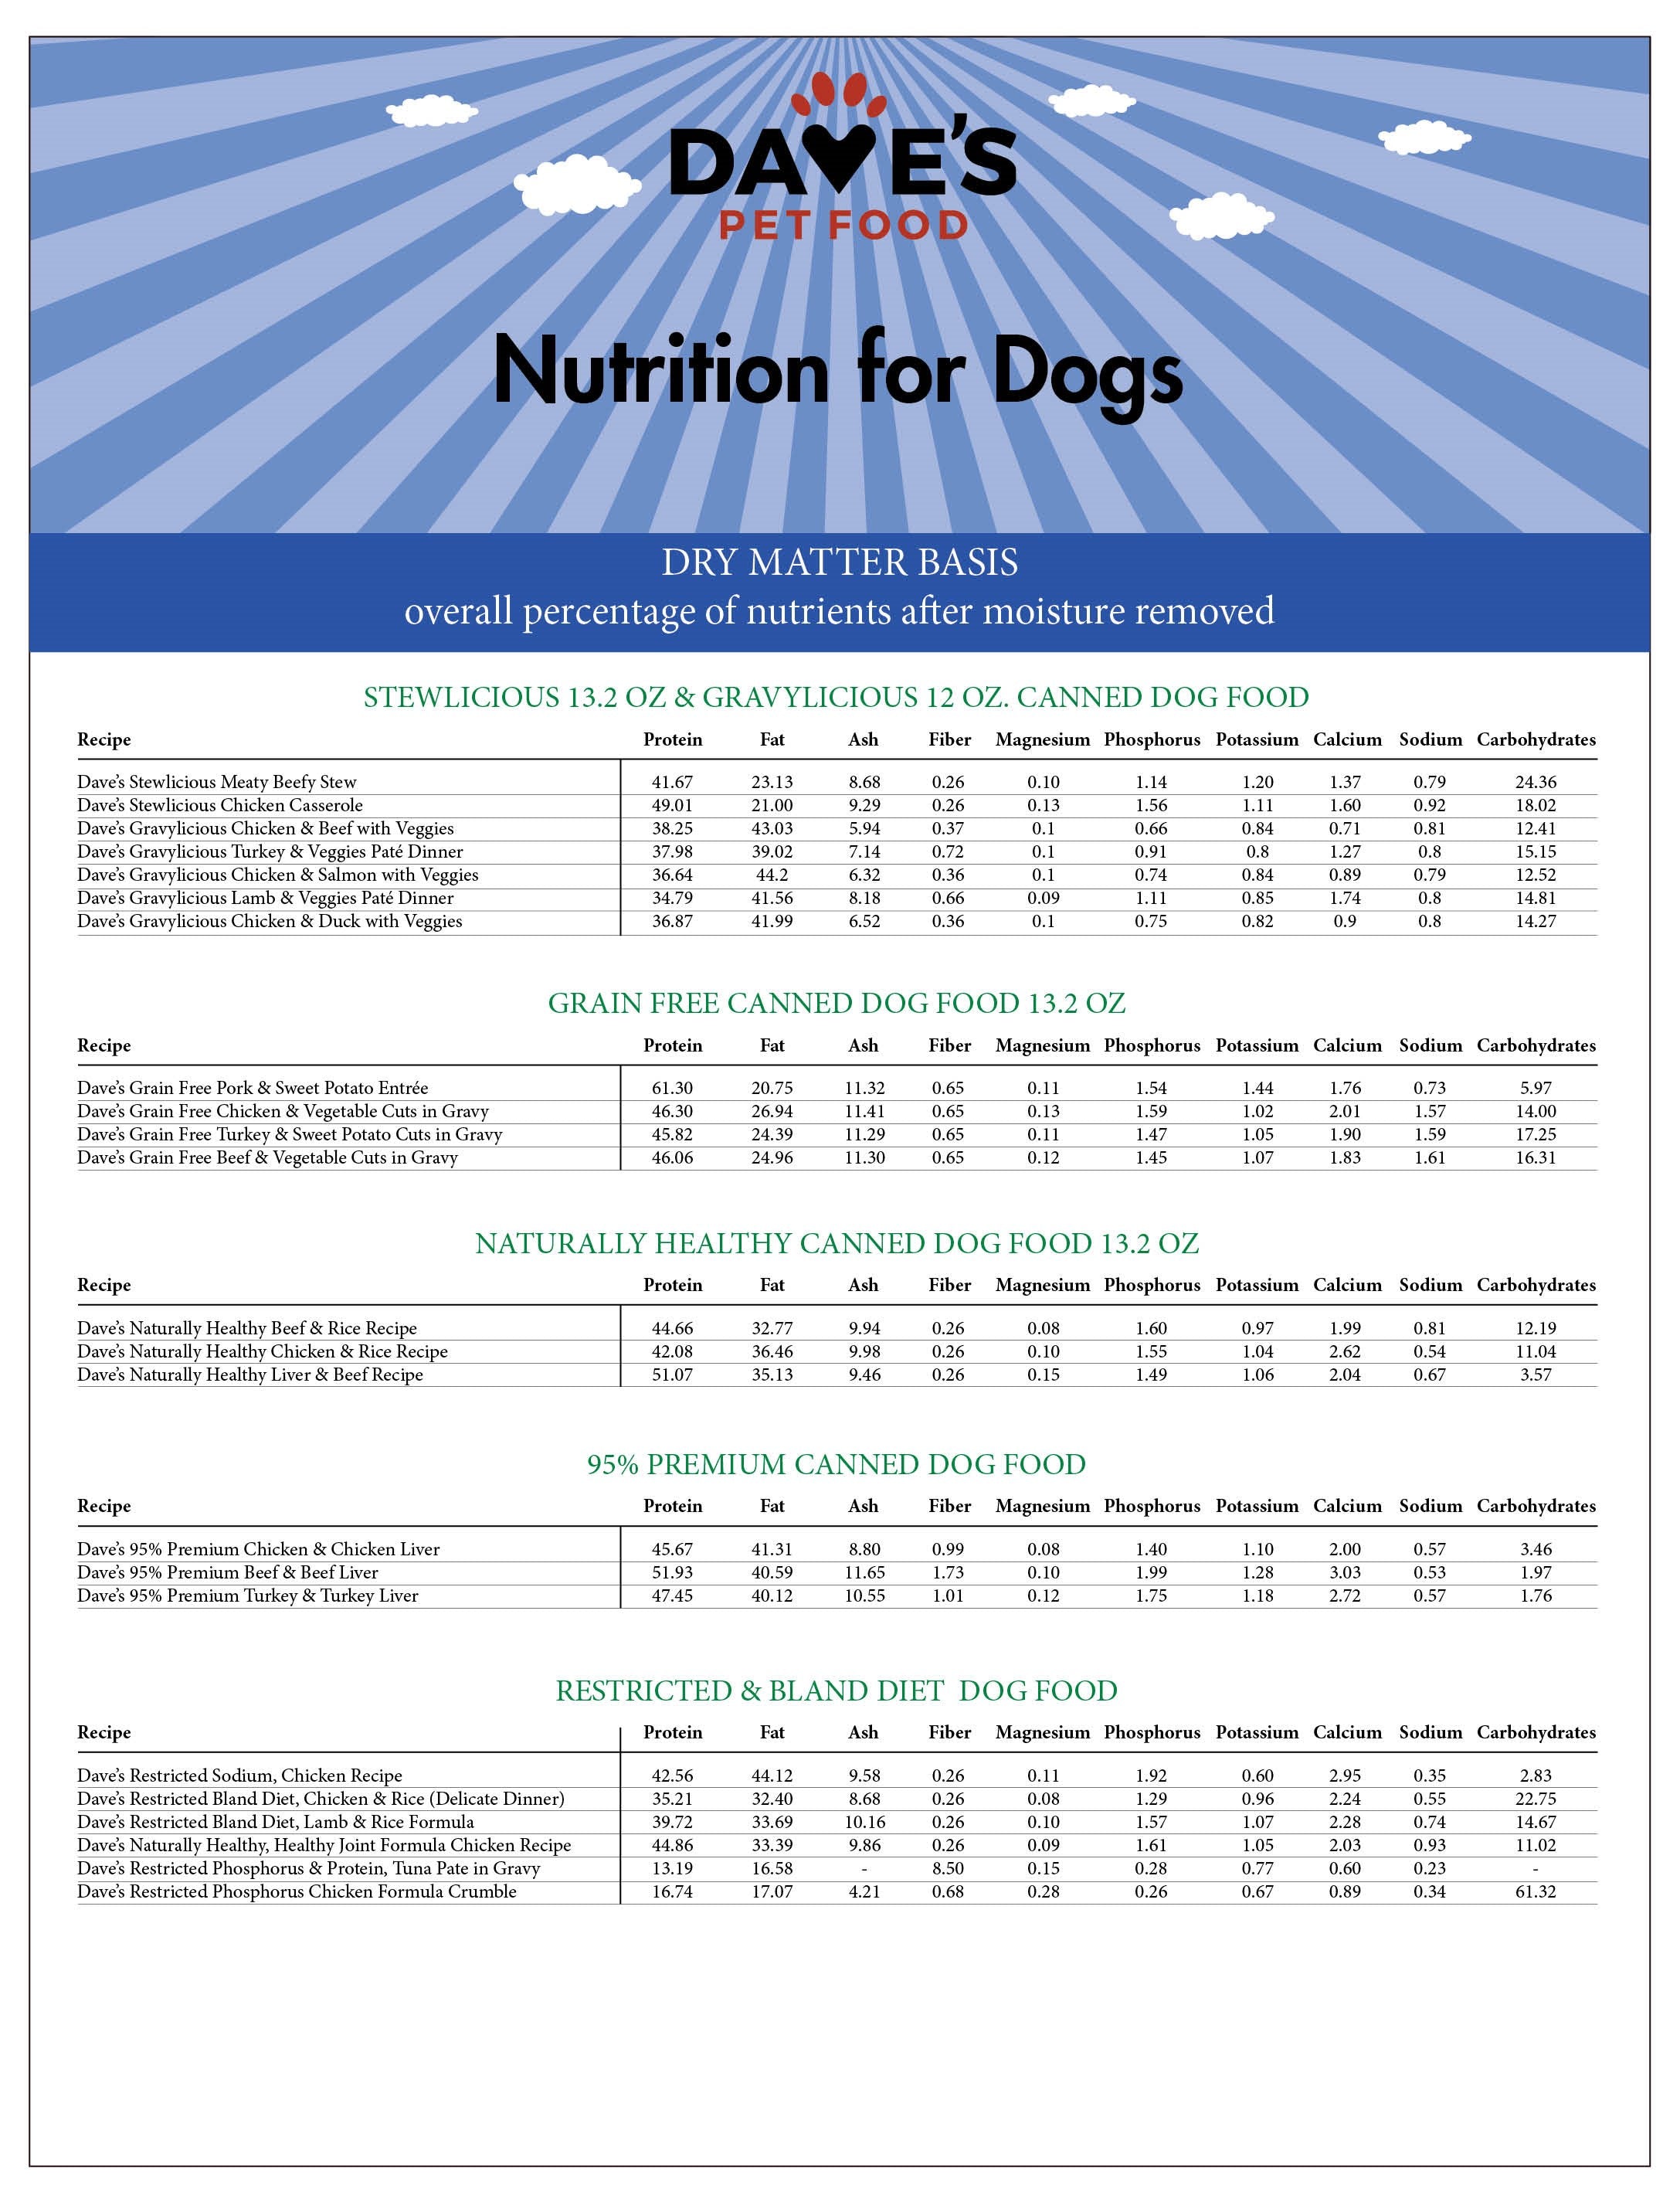 Dave's Pet Food Dry Matter Basis Nutritional Information for Dogs